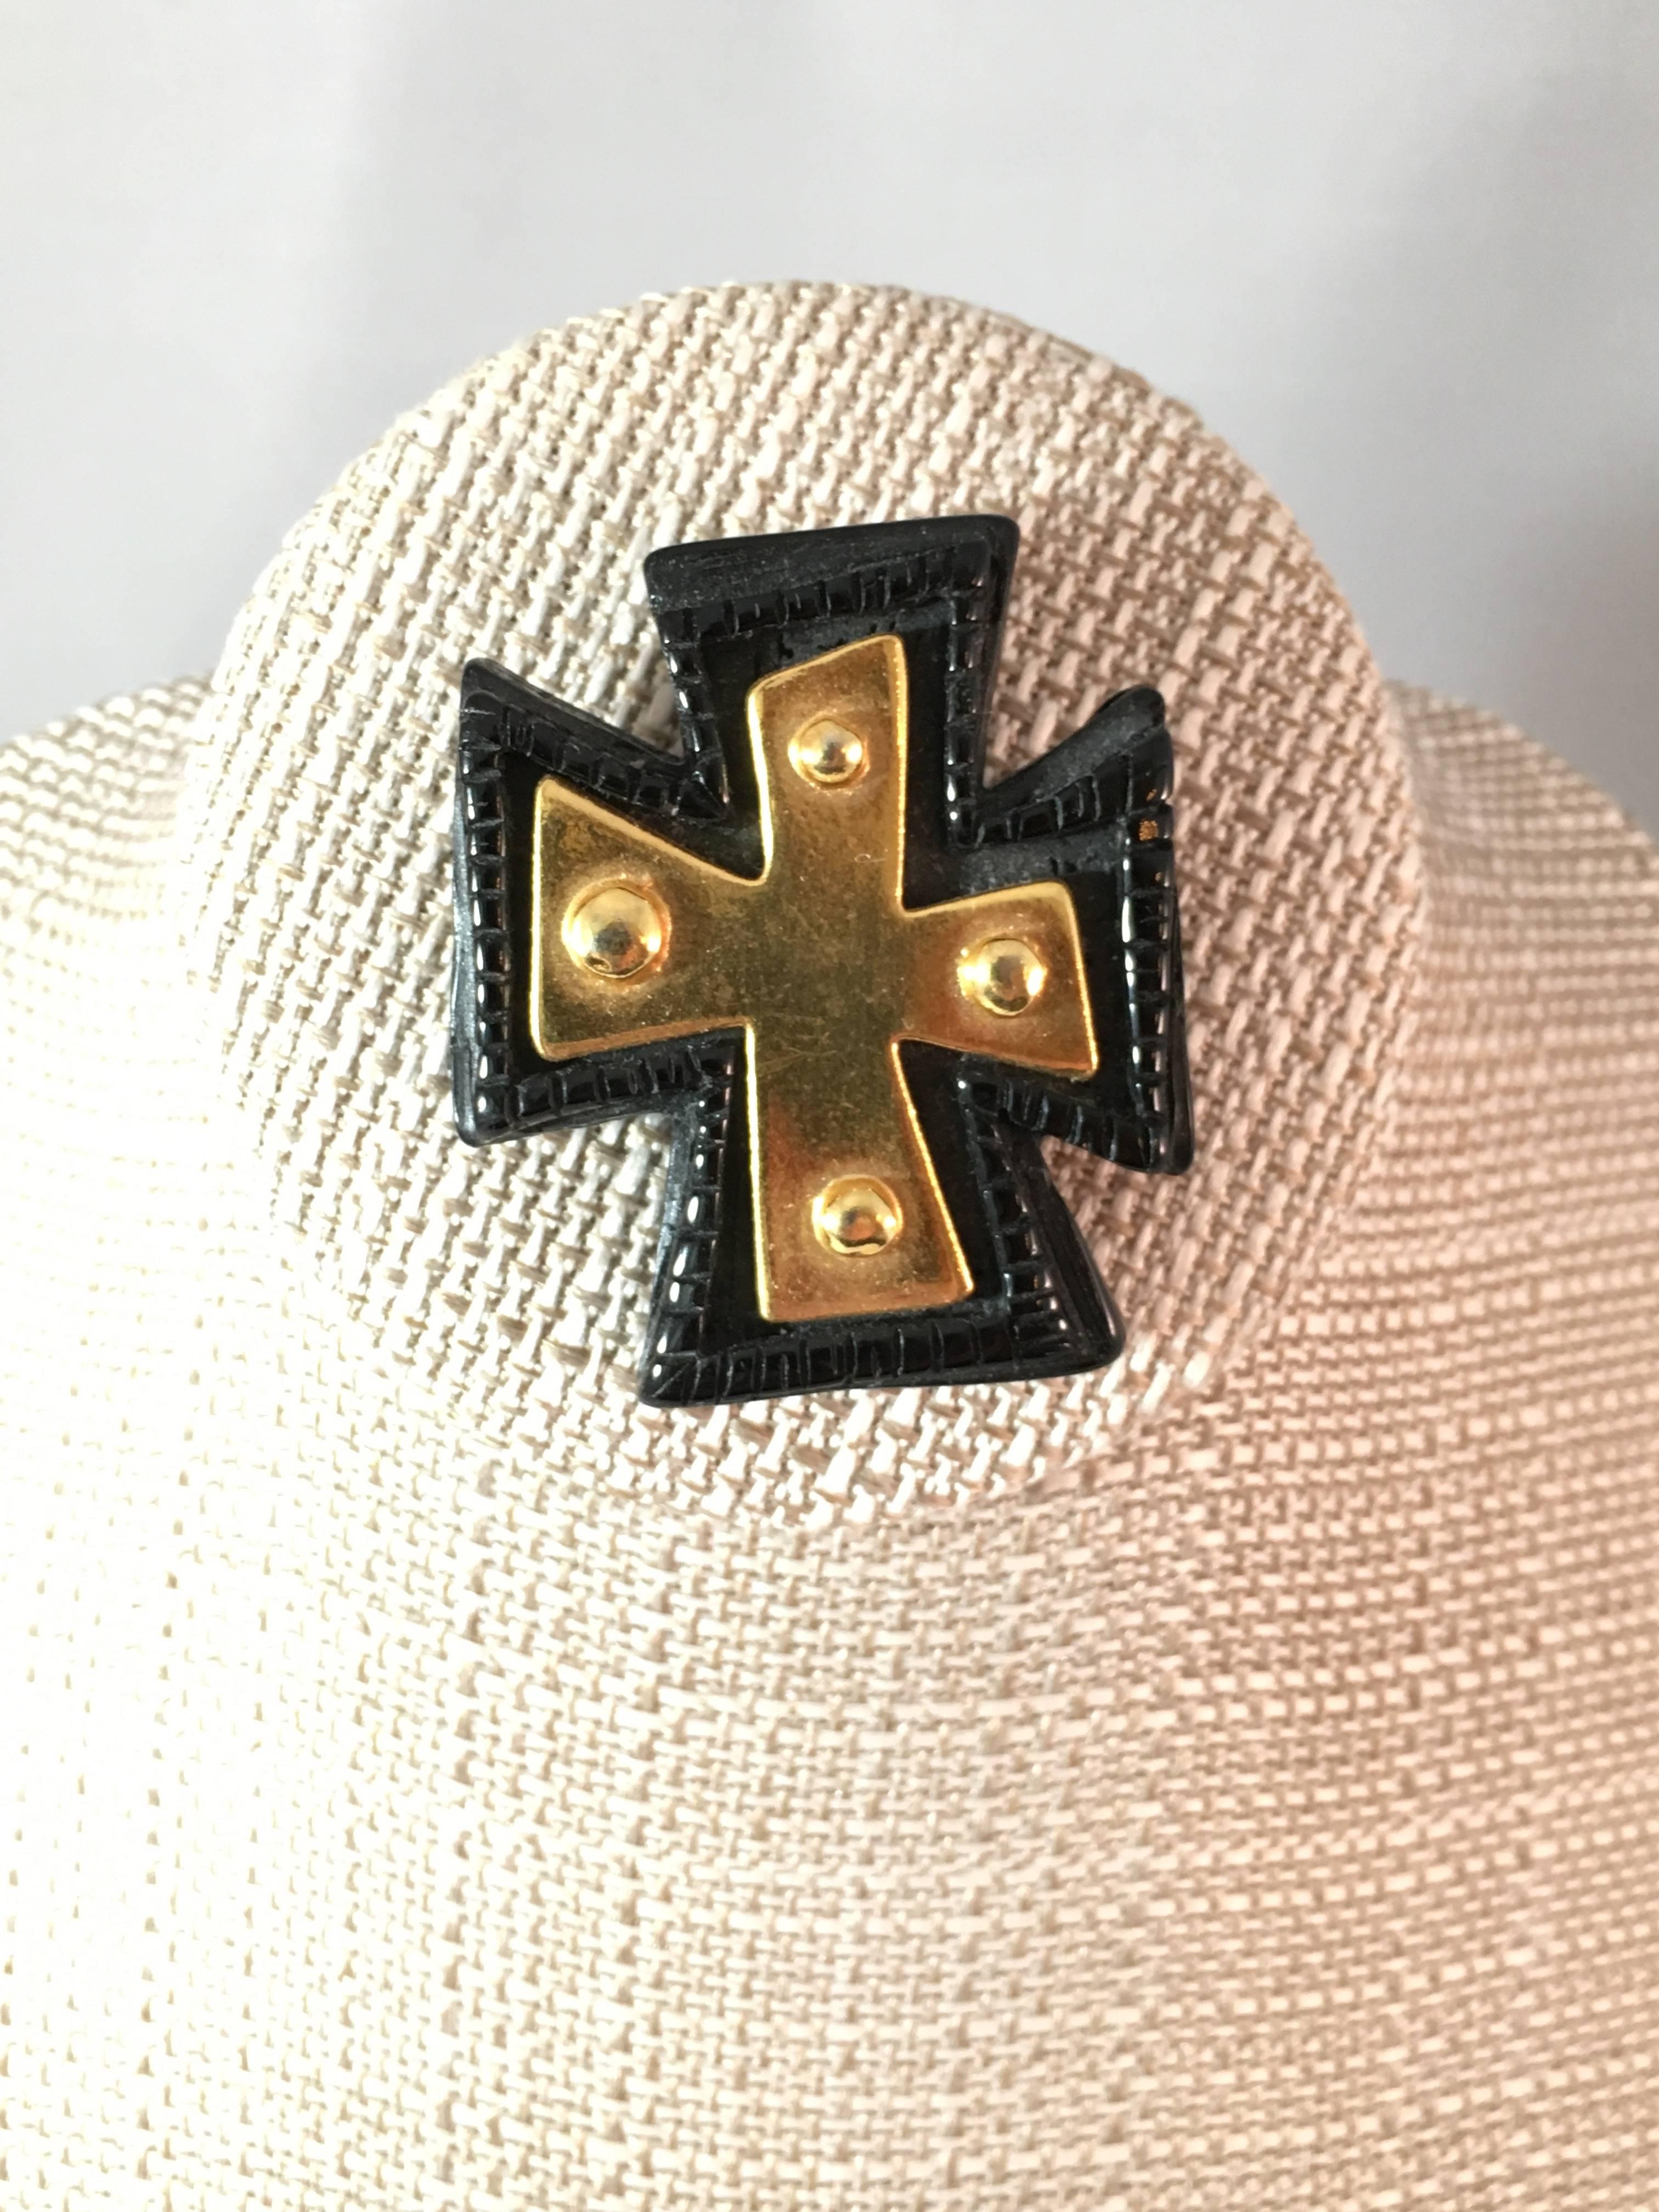 This 1980s Christian Lacroix cross brooch illustrates the designer's love of the cross as an iconic image. It is made out of black resin with a gold-tone resin cross in the center. It measures 2